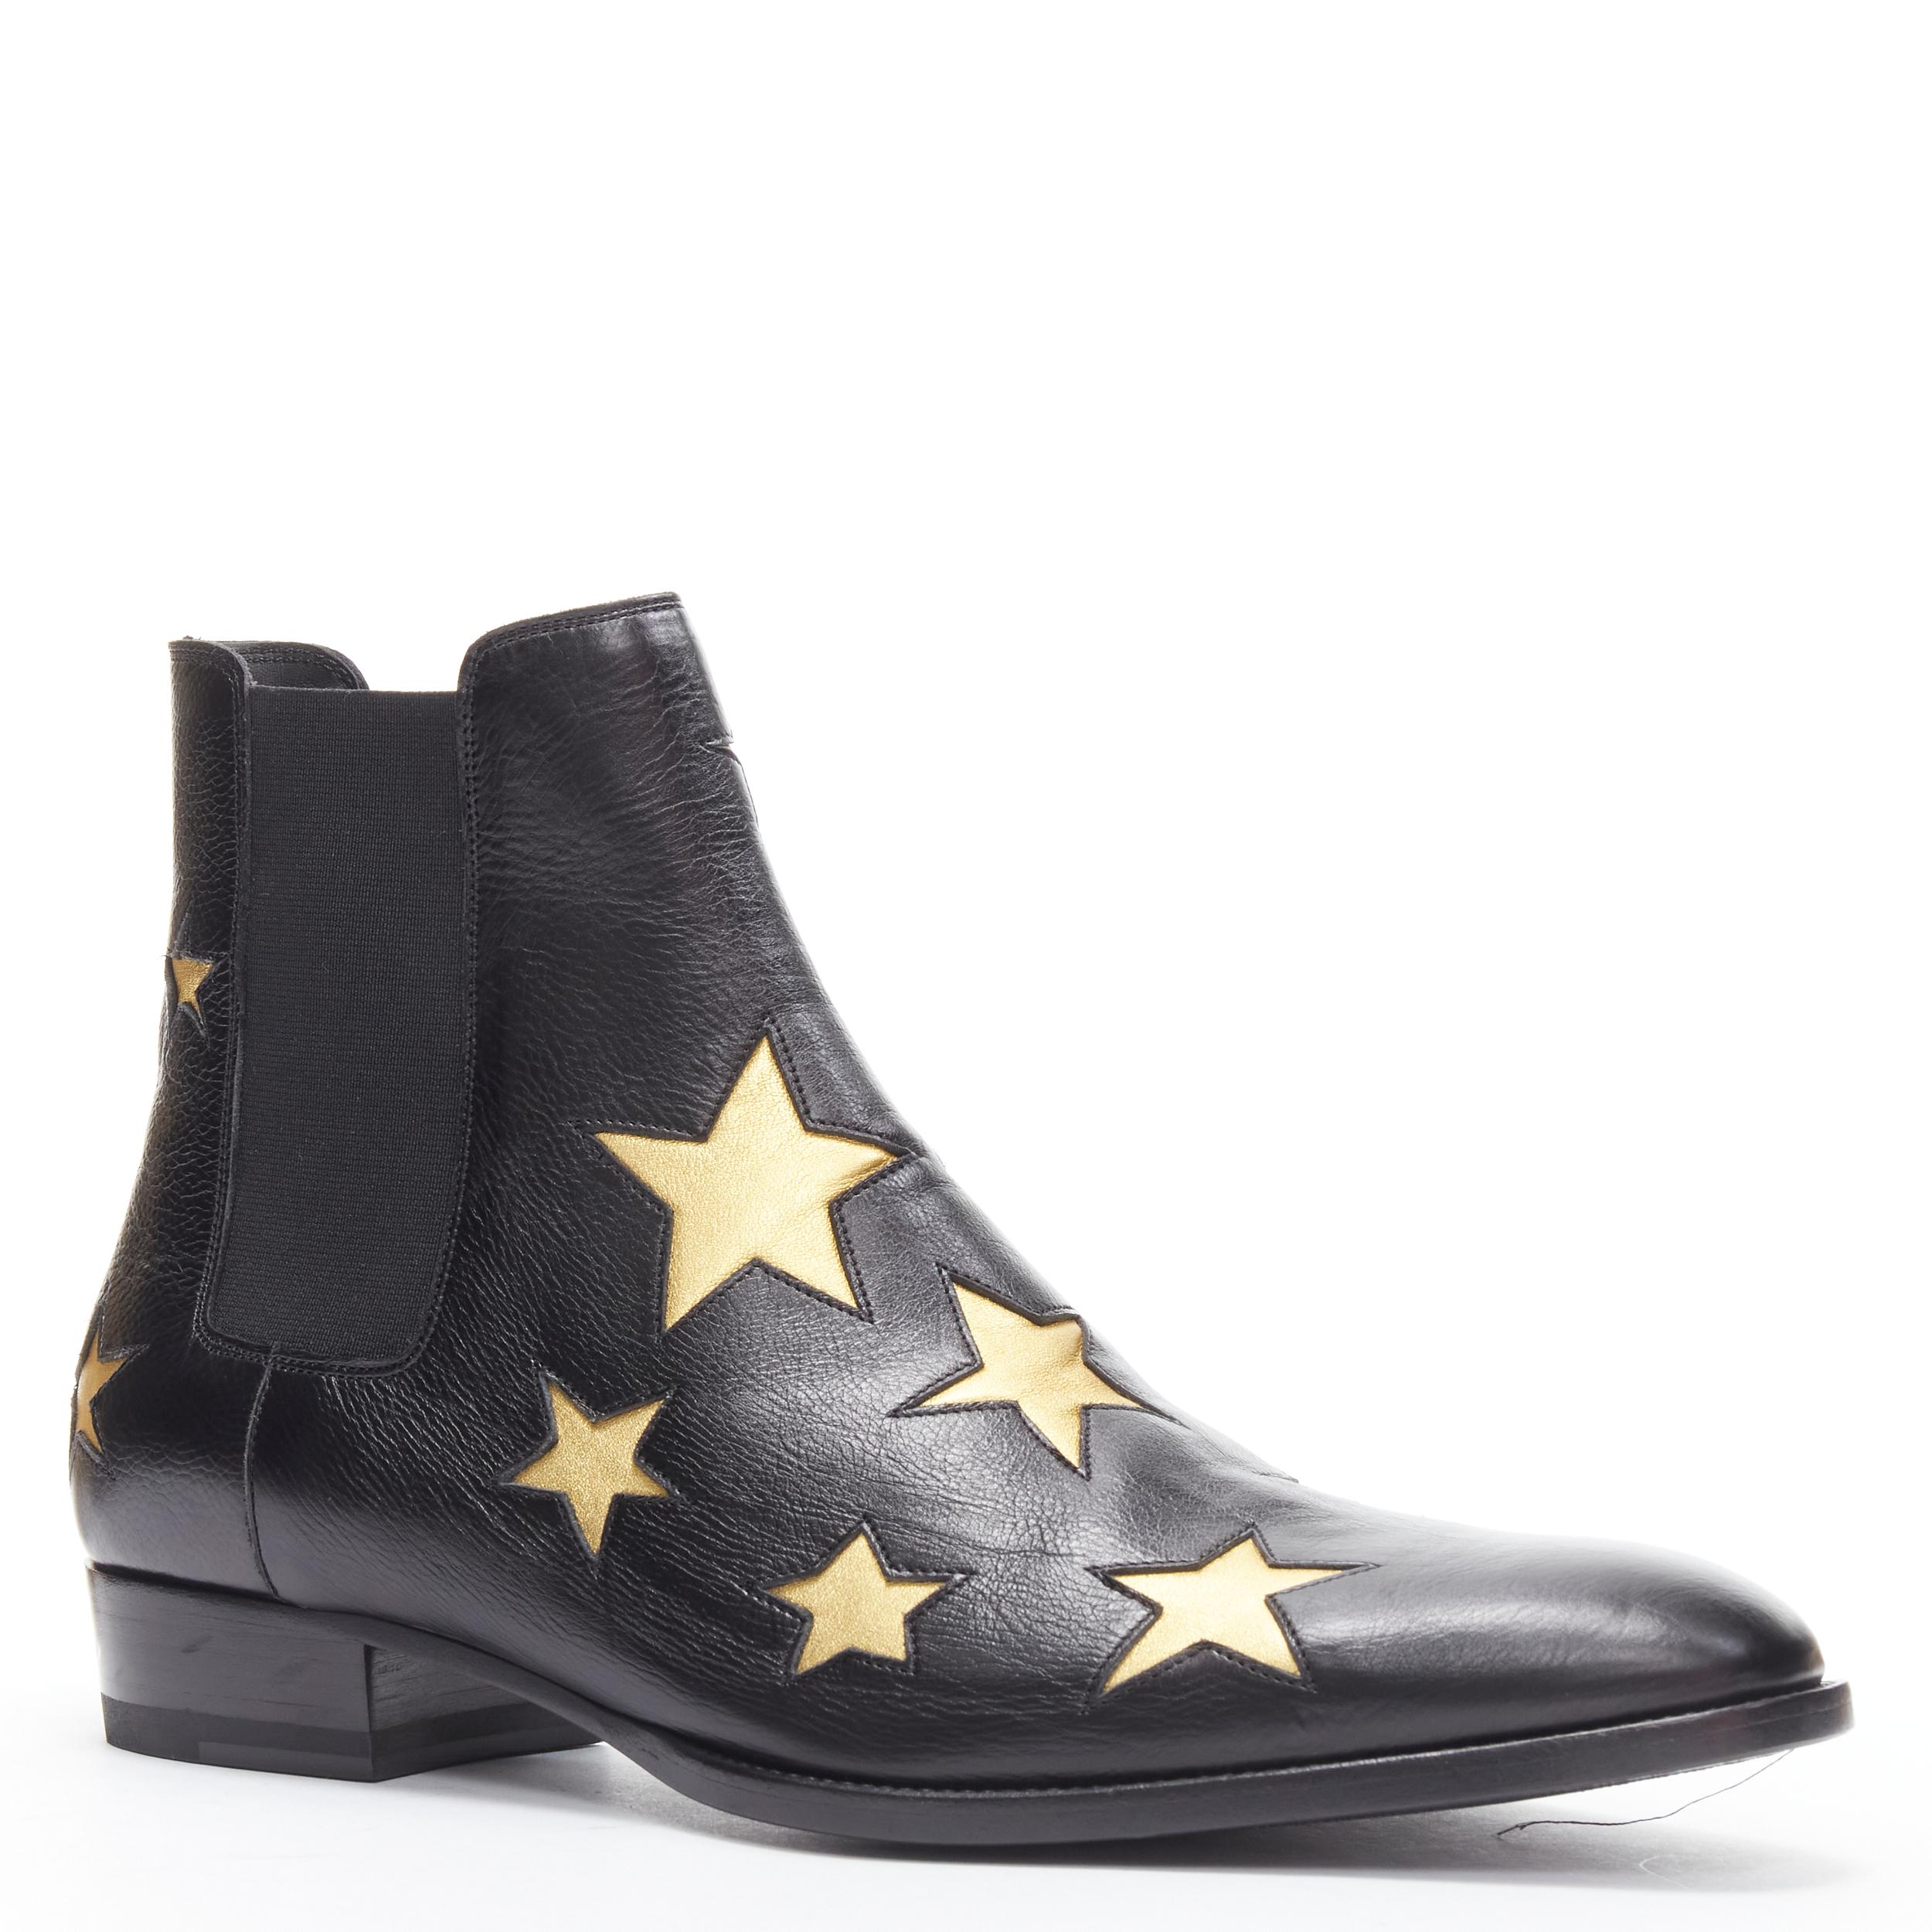 new SAINT LAURENT Wyatt 30 Riverside black gold star chelsea boot EU42 
Reference: TGAS/B01753 
Brand: Saint Laurent 
Material: Leather 
Color: Blac 
Pattern: Solid- 
Extra Detail: Black leather upper with gold star design. Stretch gusset.